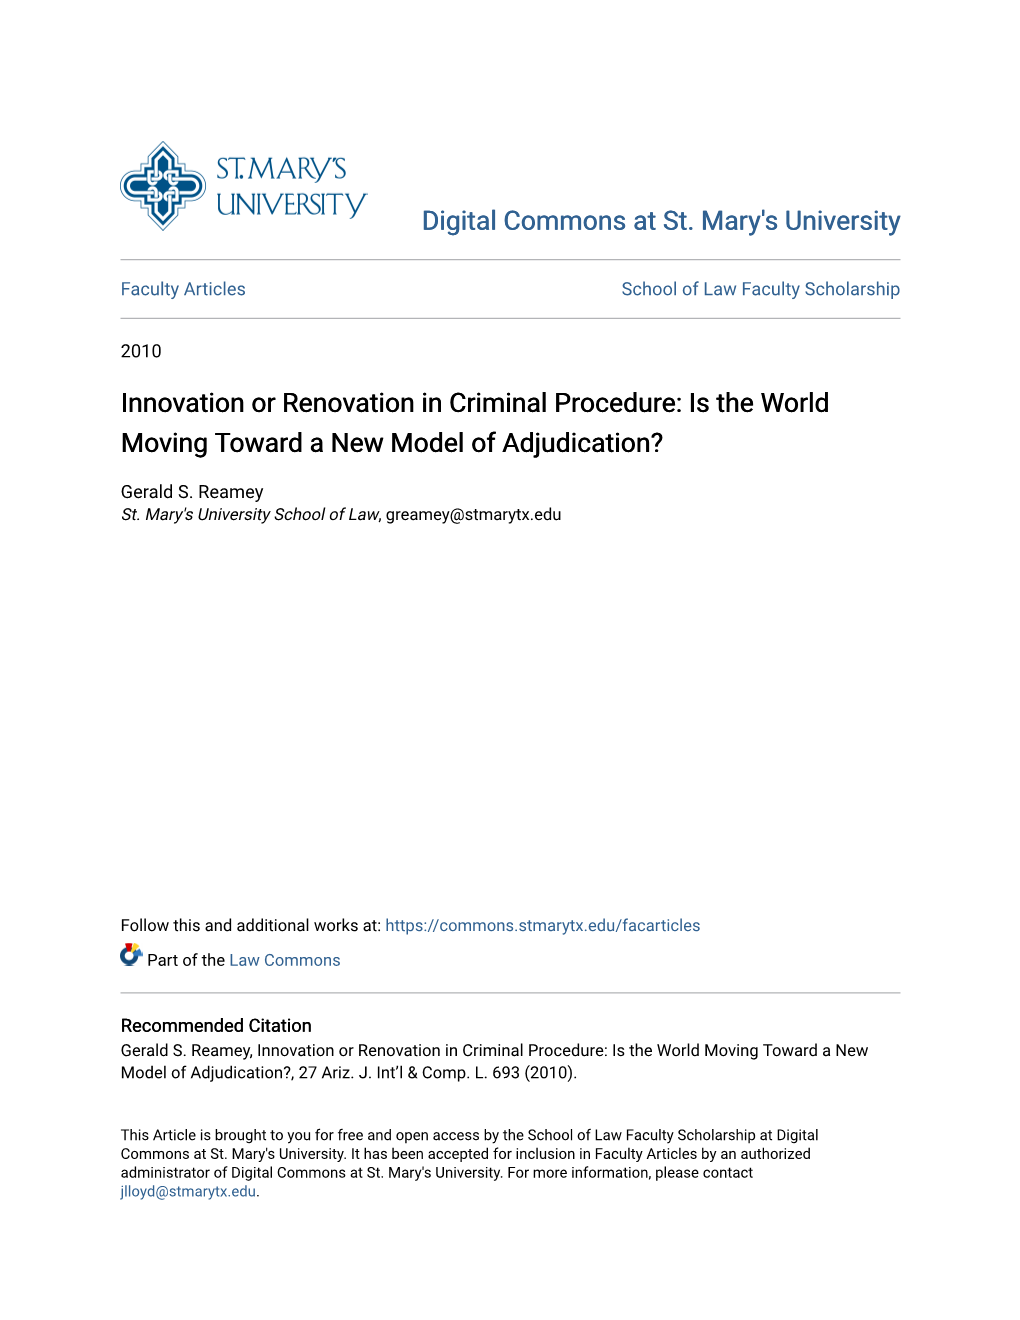 Innovation Or Renovation in Criminal Procedure: Is the World Moving Toward a New Model of Adjudication?